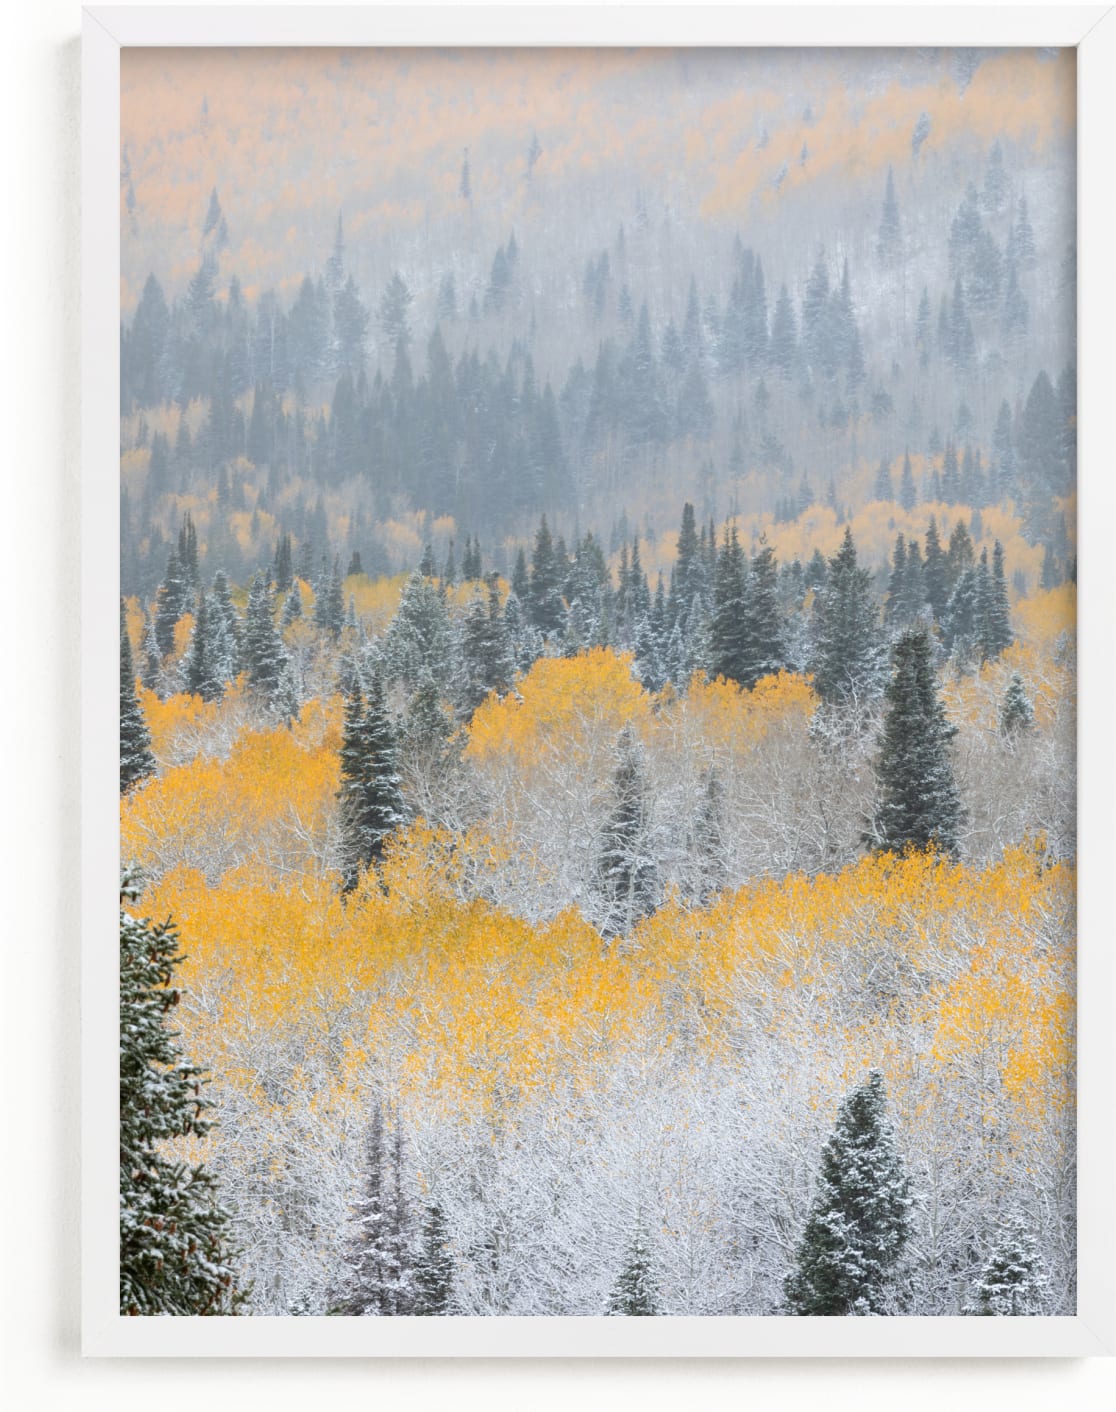 This is a yellow art by Eric Clegg called Autumn Snowfall.